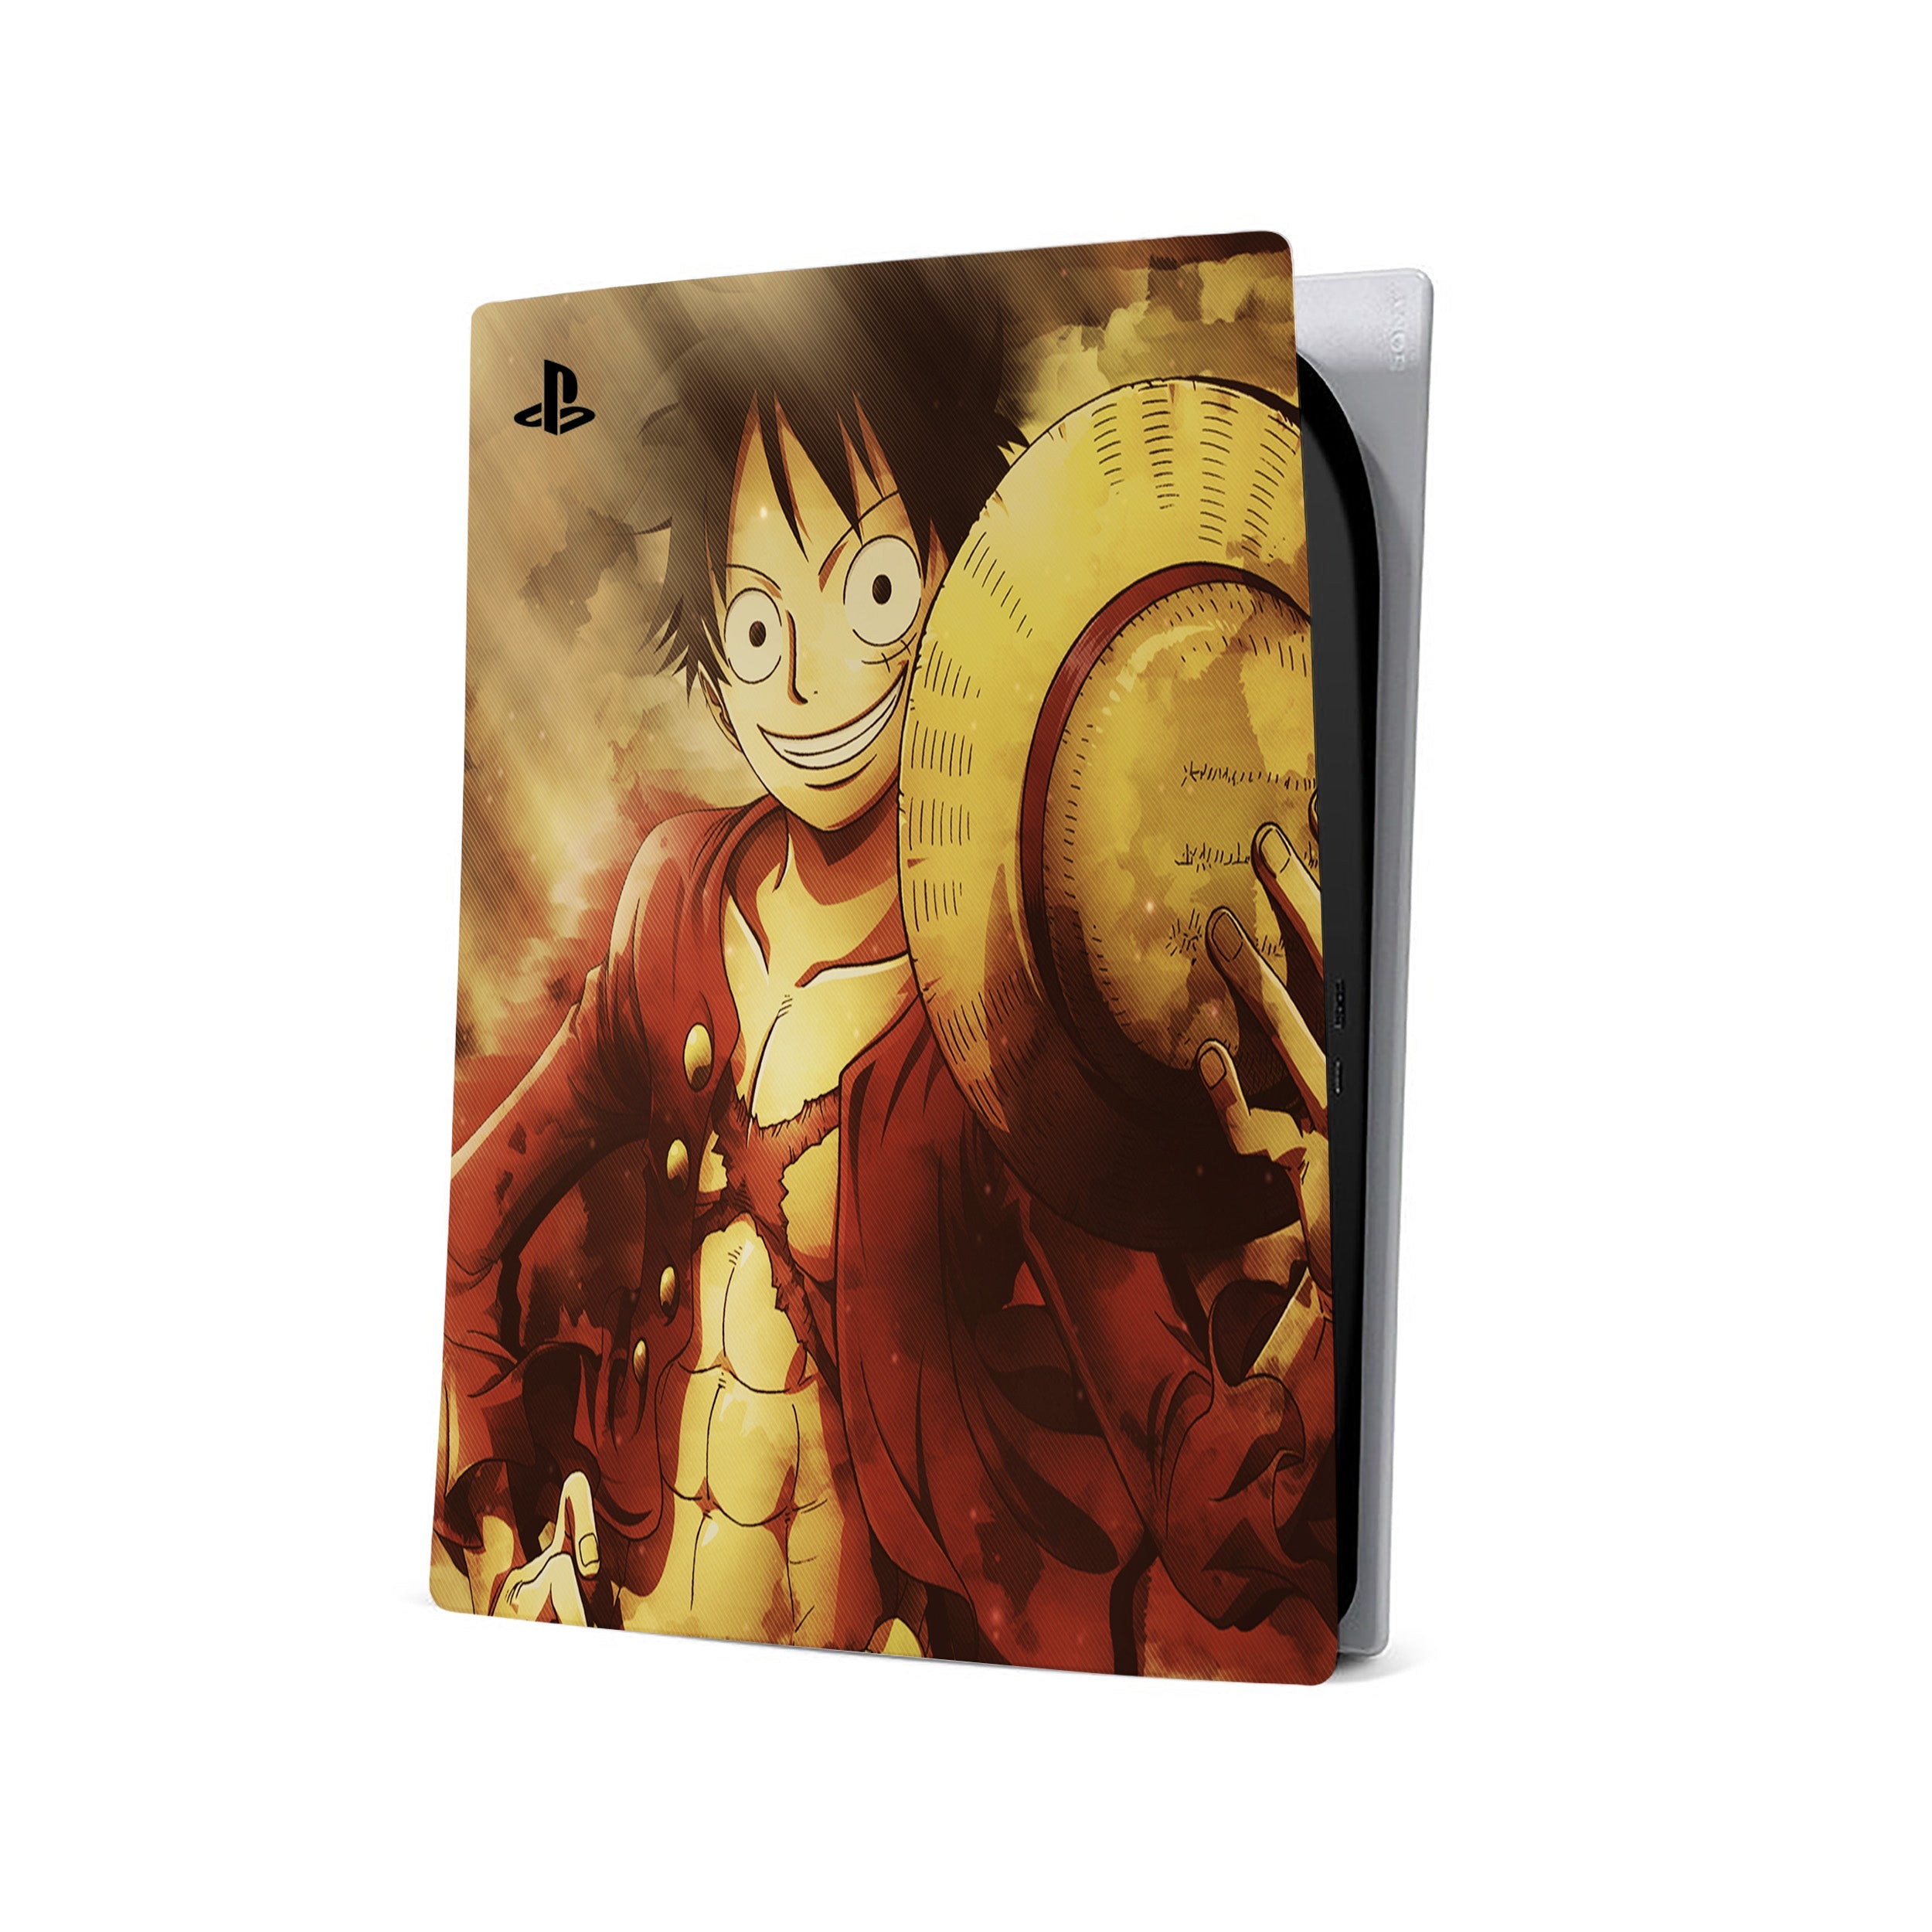 A video game skin featuring a One Piece Monkey D Luffy design for the PS5.